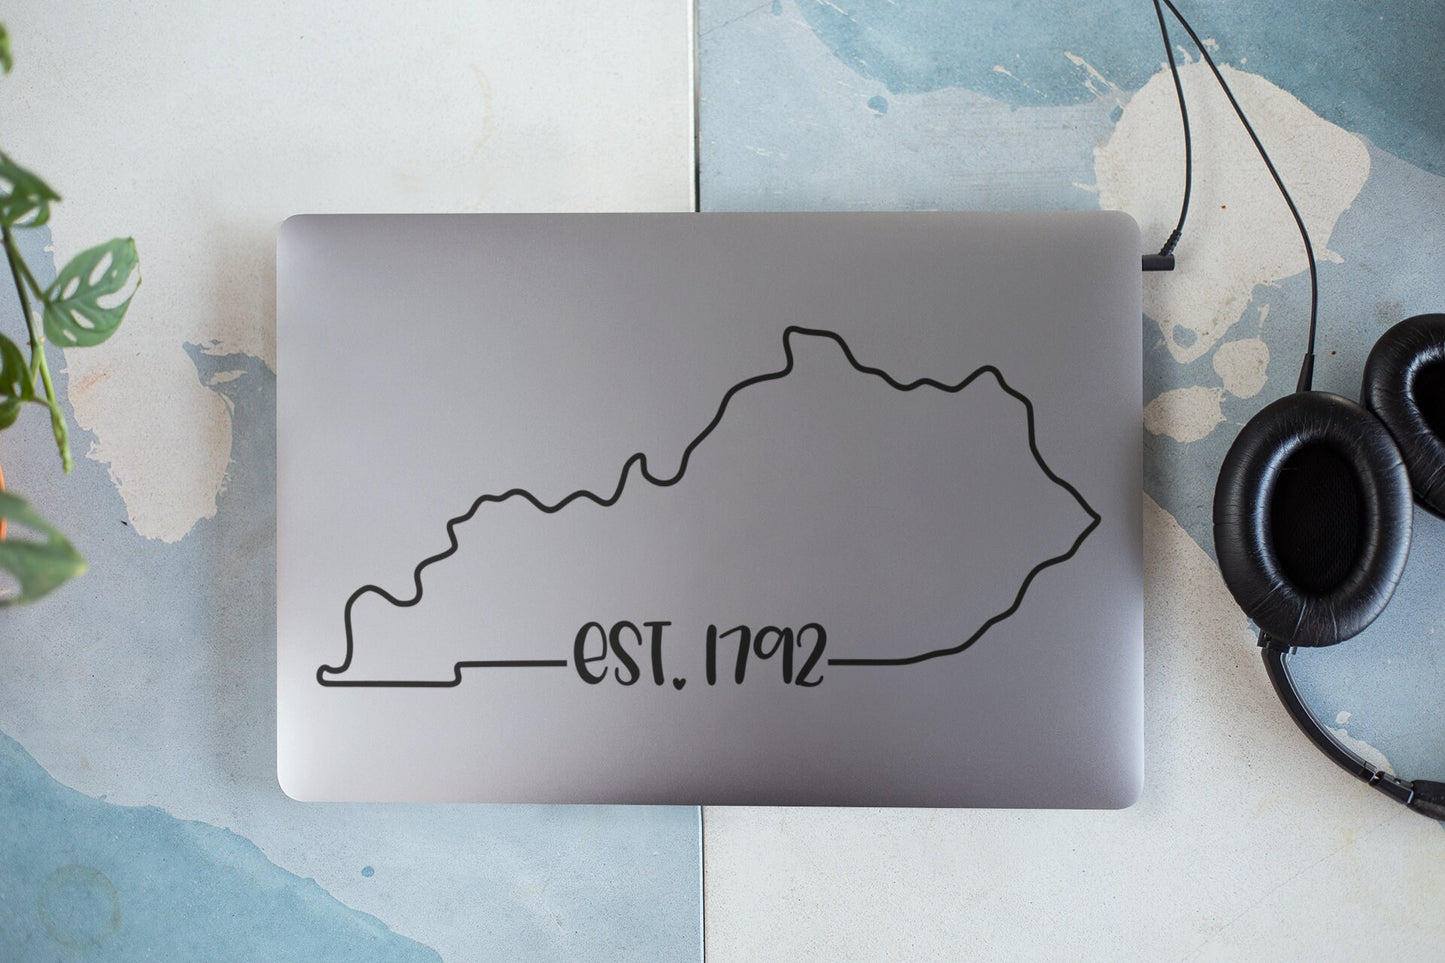 Kentucky EST. 1792 Decal - Many Colors & Sizes